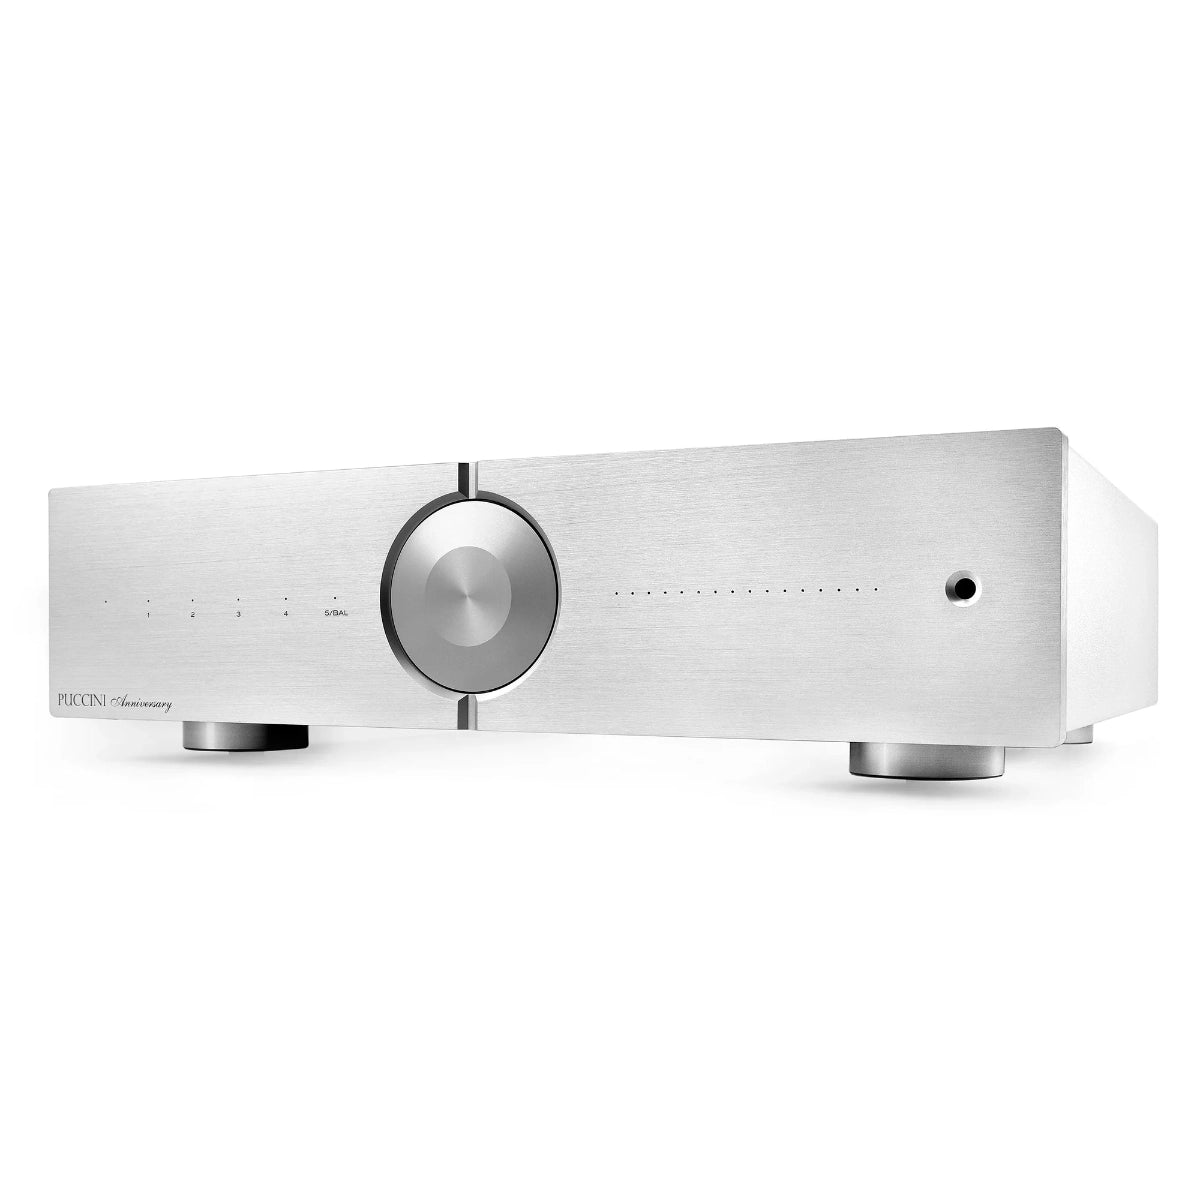 An image of Audio Analogue's Puccini Anniversary 80W integrated amplifier, in silver finish.